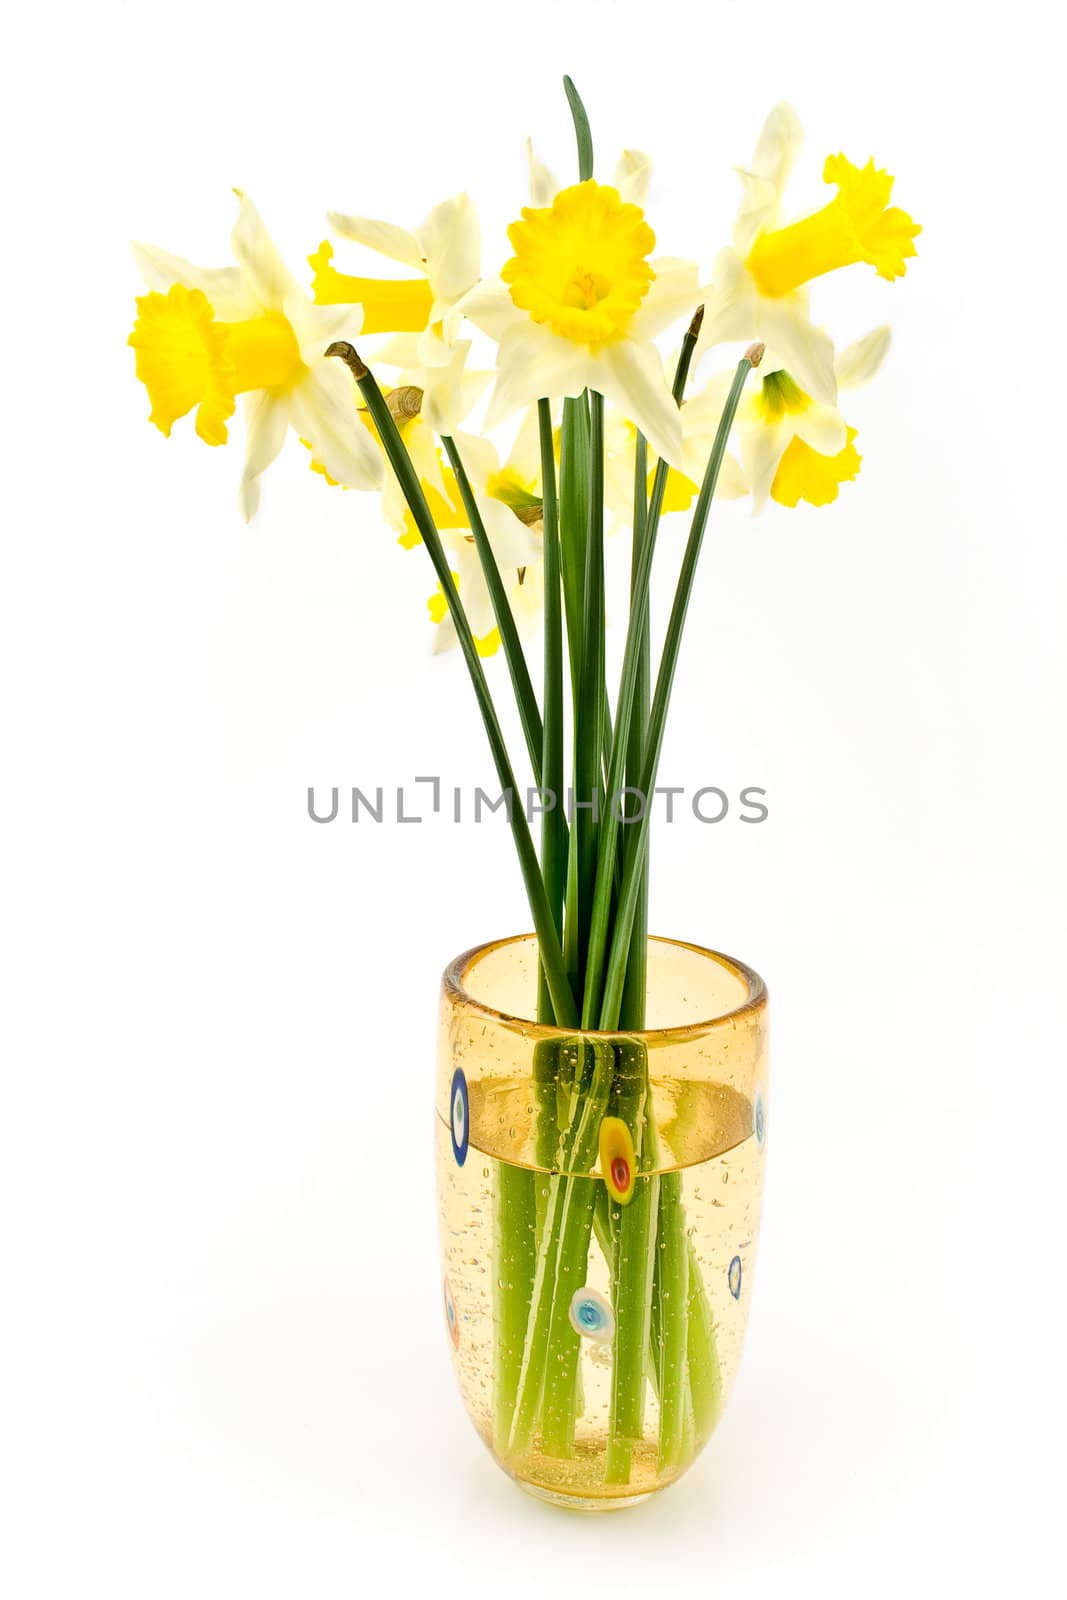 A bouquet of yellow daffodils narcissus isolated on white